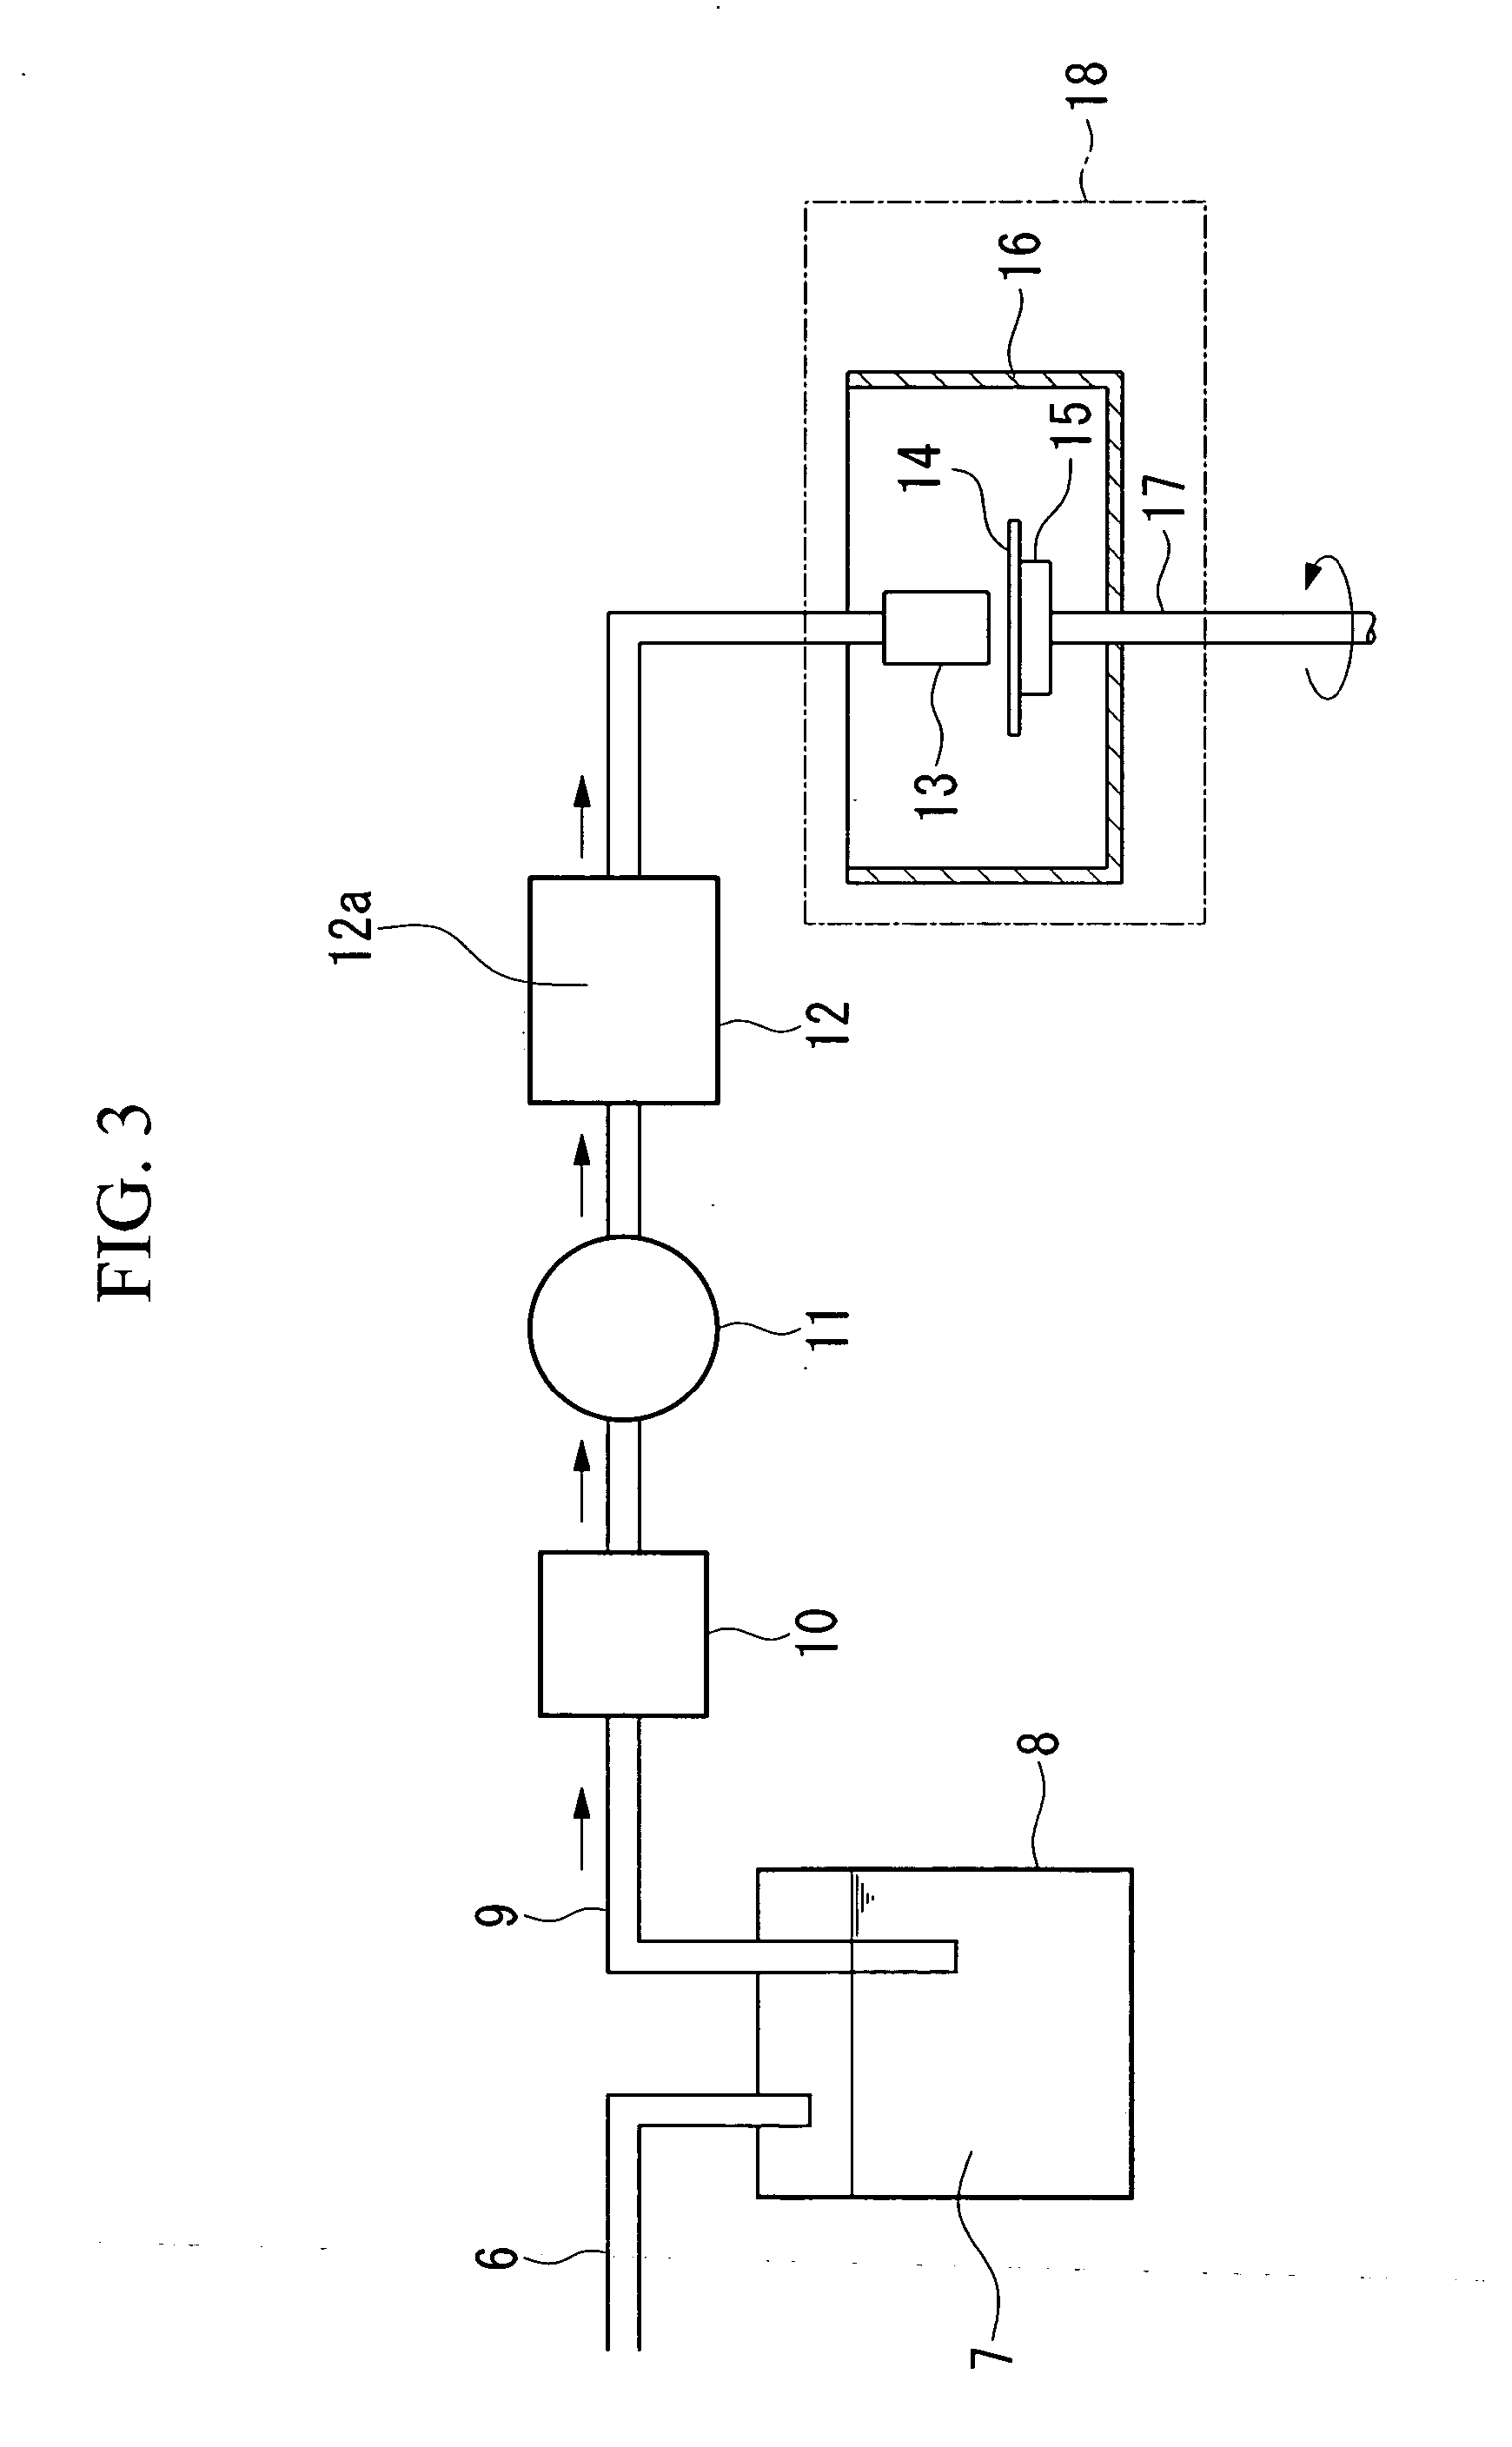 Process for producing photoresist composition, filtration device, application device, and photoresist composition